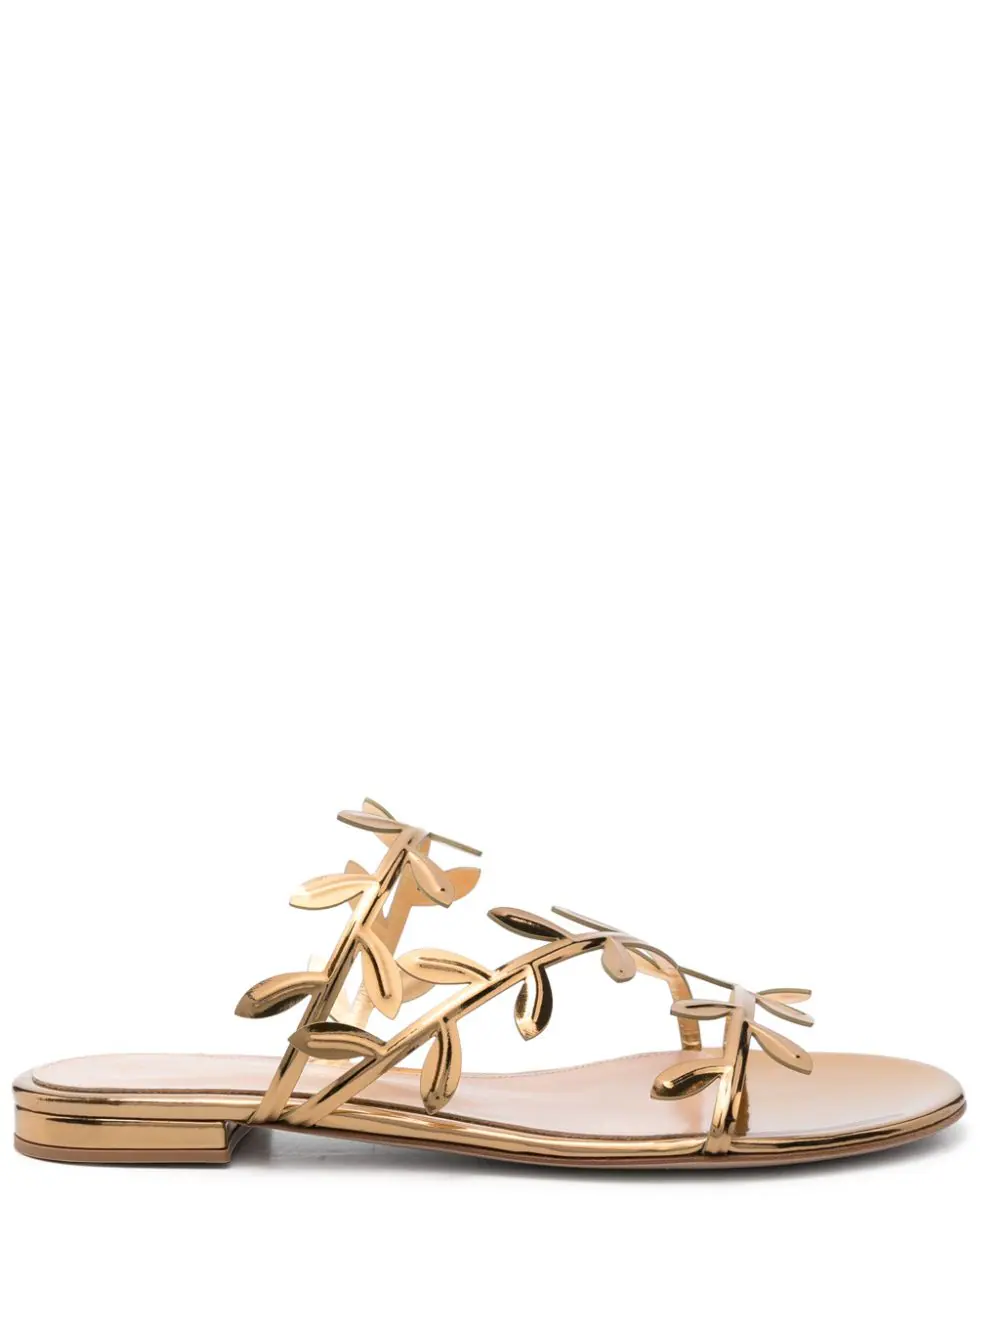 Shop Gianvito Rossi Flavia Sandals With Flat Sole In Metallic